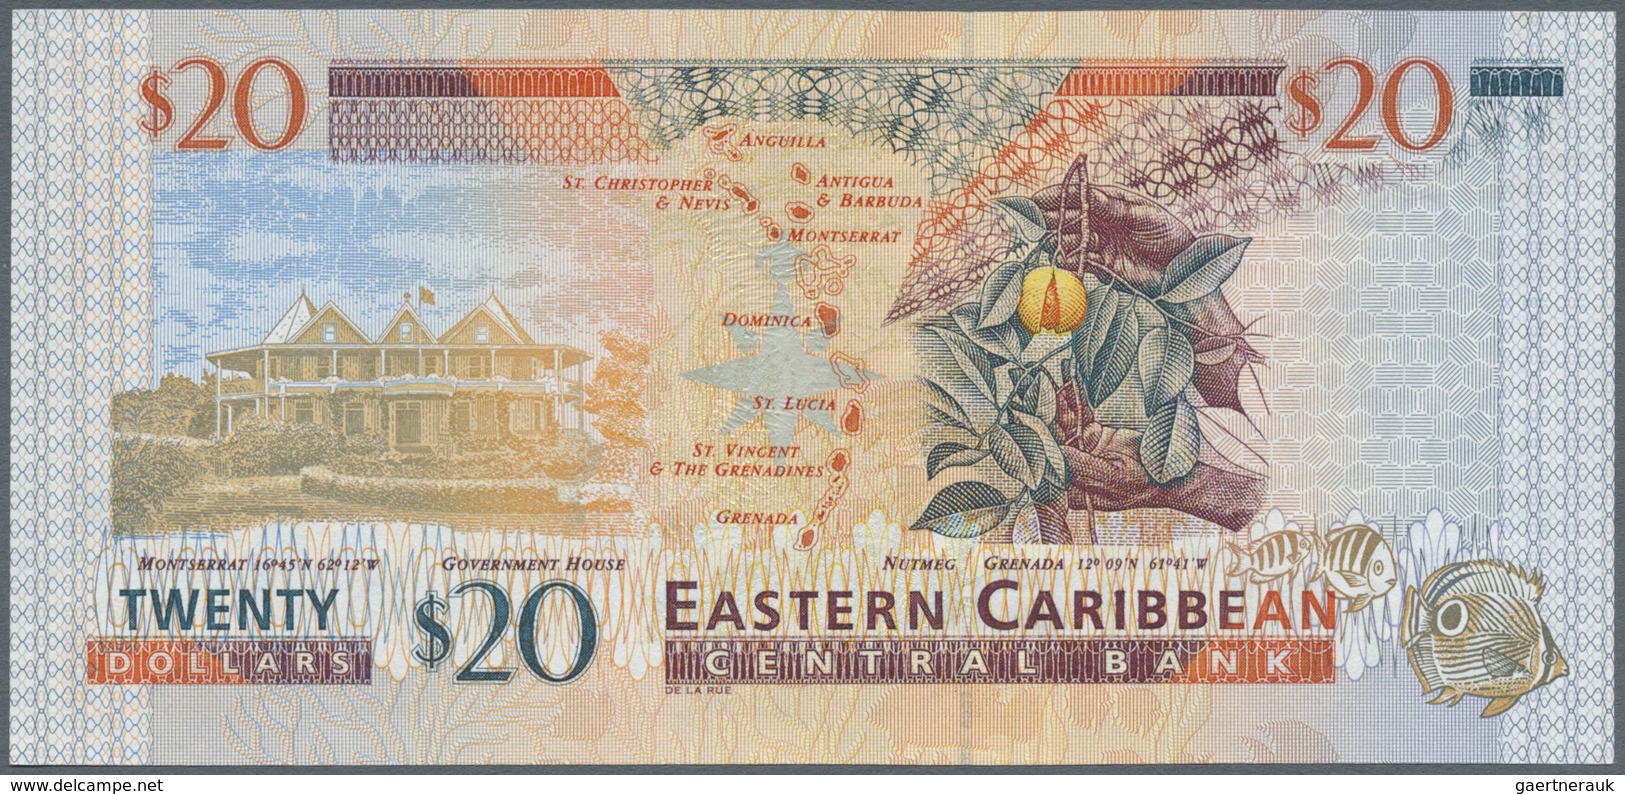 East Caribbean States / Ostkaribische Staaten: Set with 6 Banknotes series ND(2000) comprising $5 x2